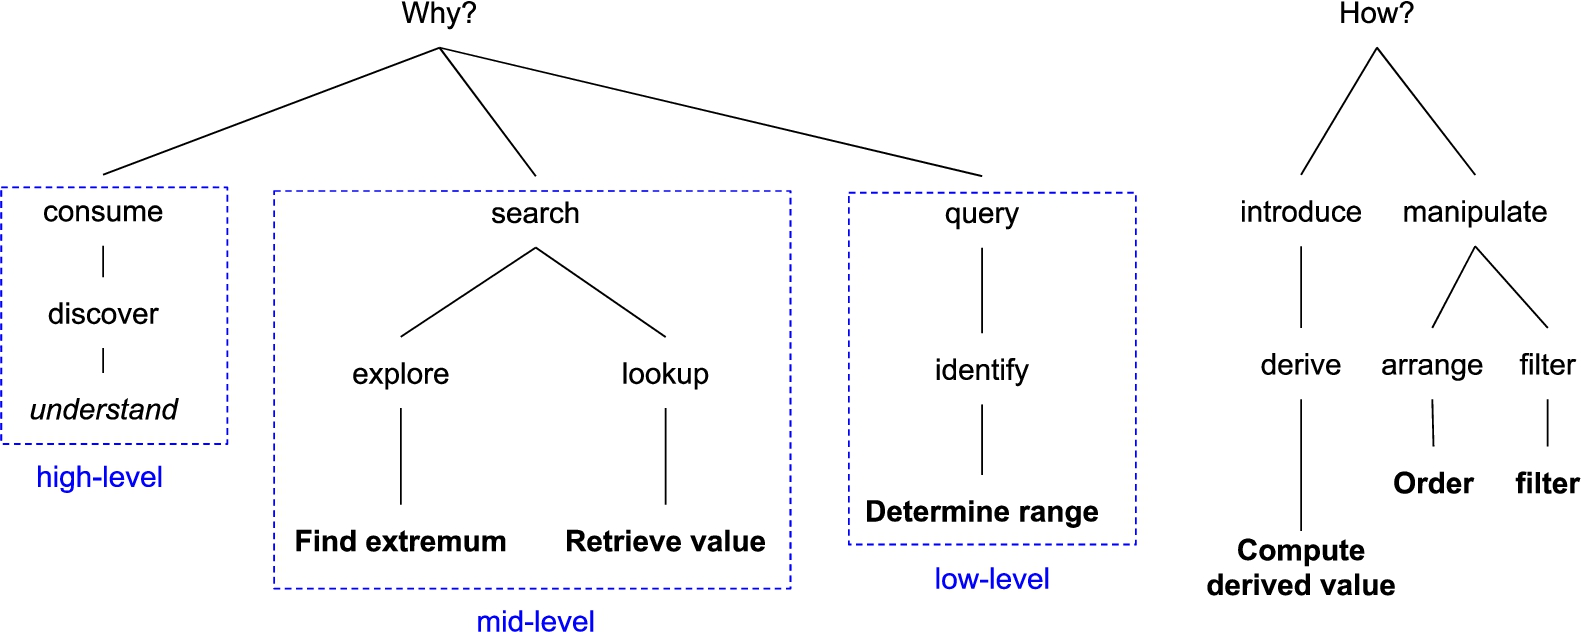 Selected tasks from Amar et al. [2] (bold) arranged in the typology of Brehmer and Munzner [9] according to their multi-level alignment. The user study had the high-level goal to discover, concretely to understand as defined by Pike et al. [49]. This involves mid-level search tasks of explore and lookup, low-level tasks of identifying, as well as cognitive interaction methods (introduce and manipulate). From 10 tasks introduced by Amar et al. only 6 were chosen to keep the follow-up study short, i.e. maximum 1 task per typology leaf node in case there were multiple.